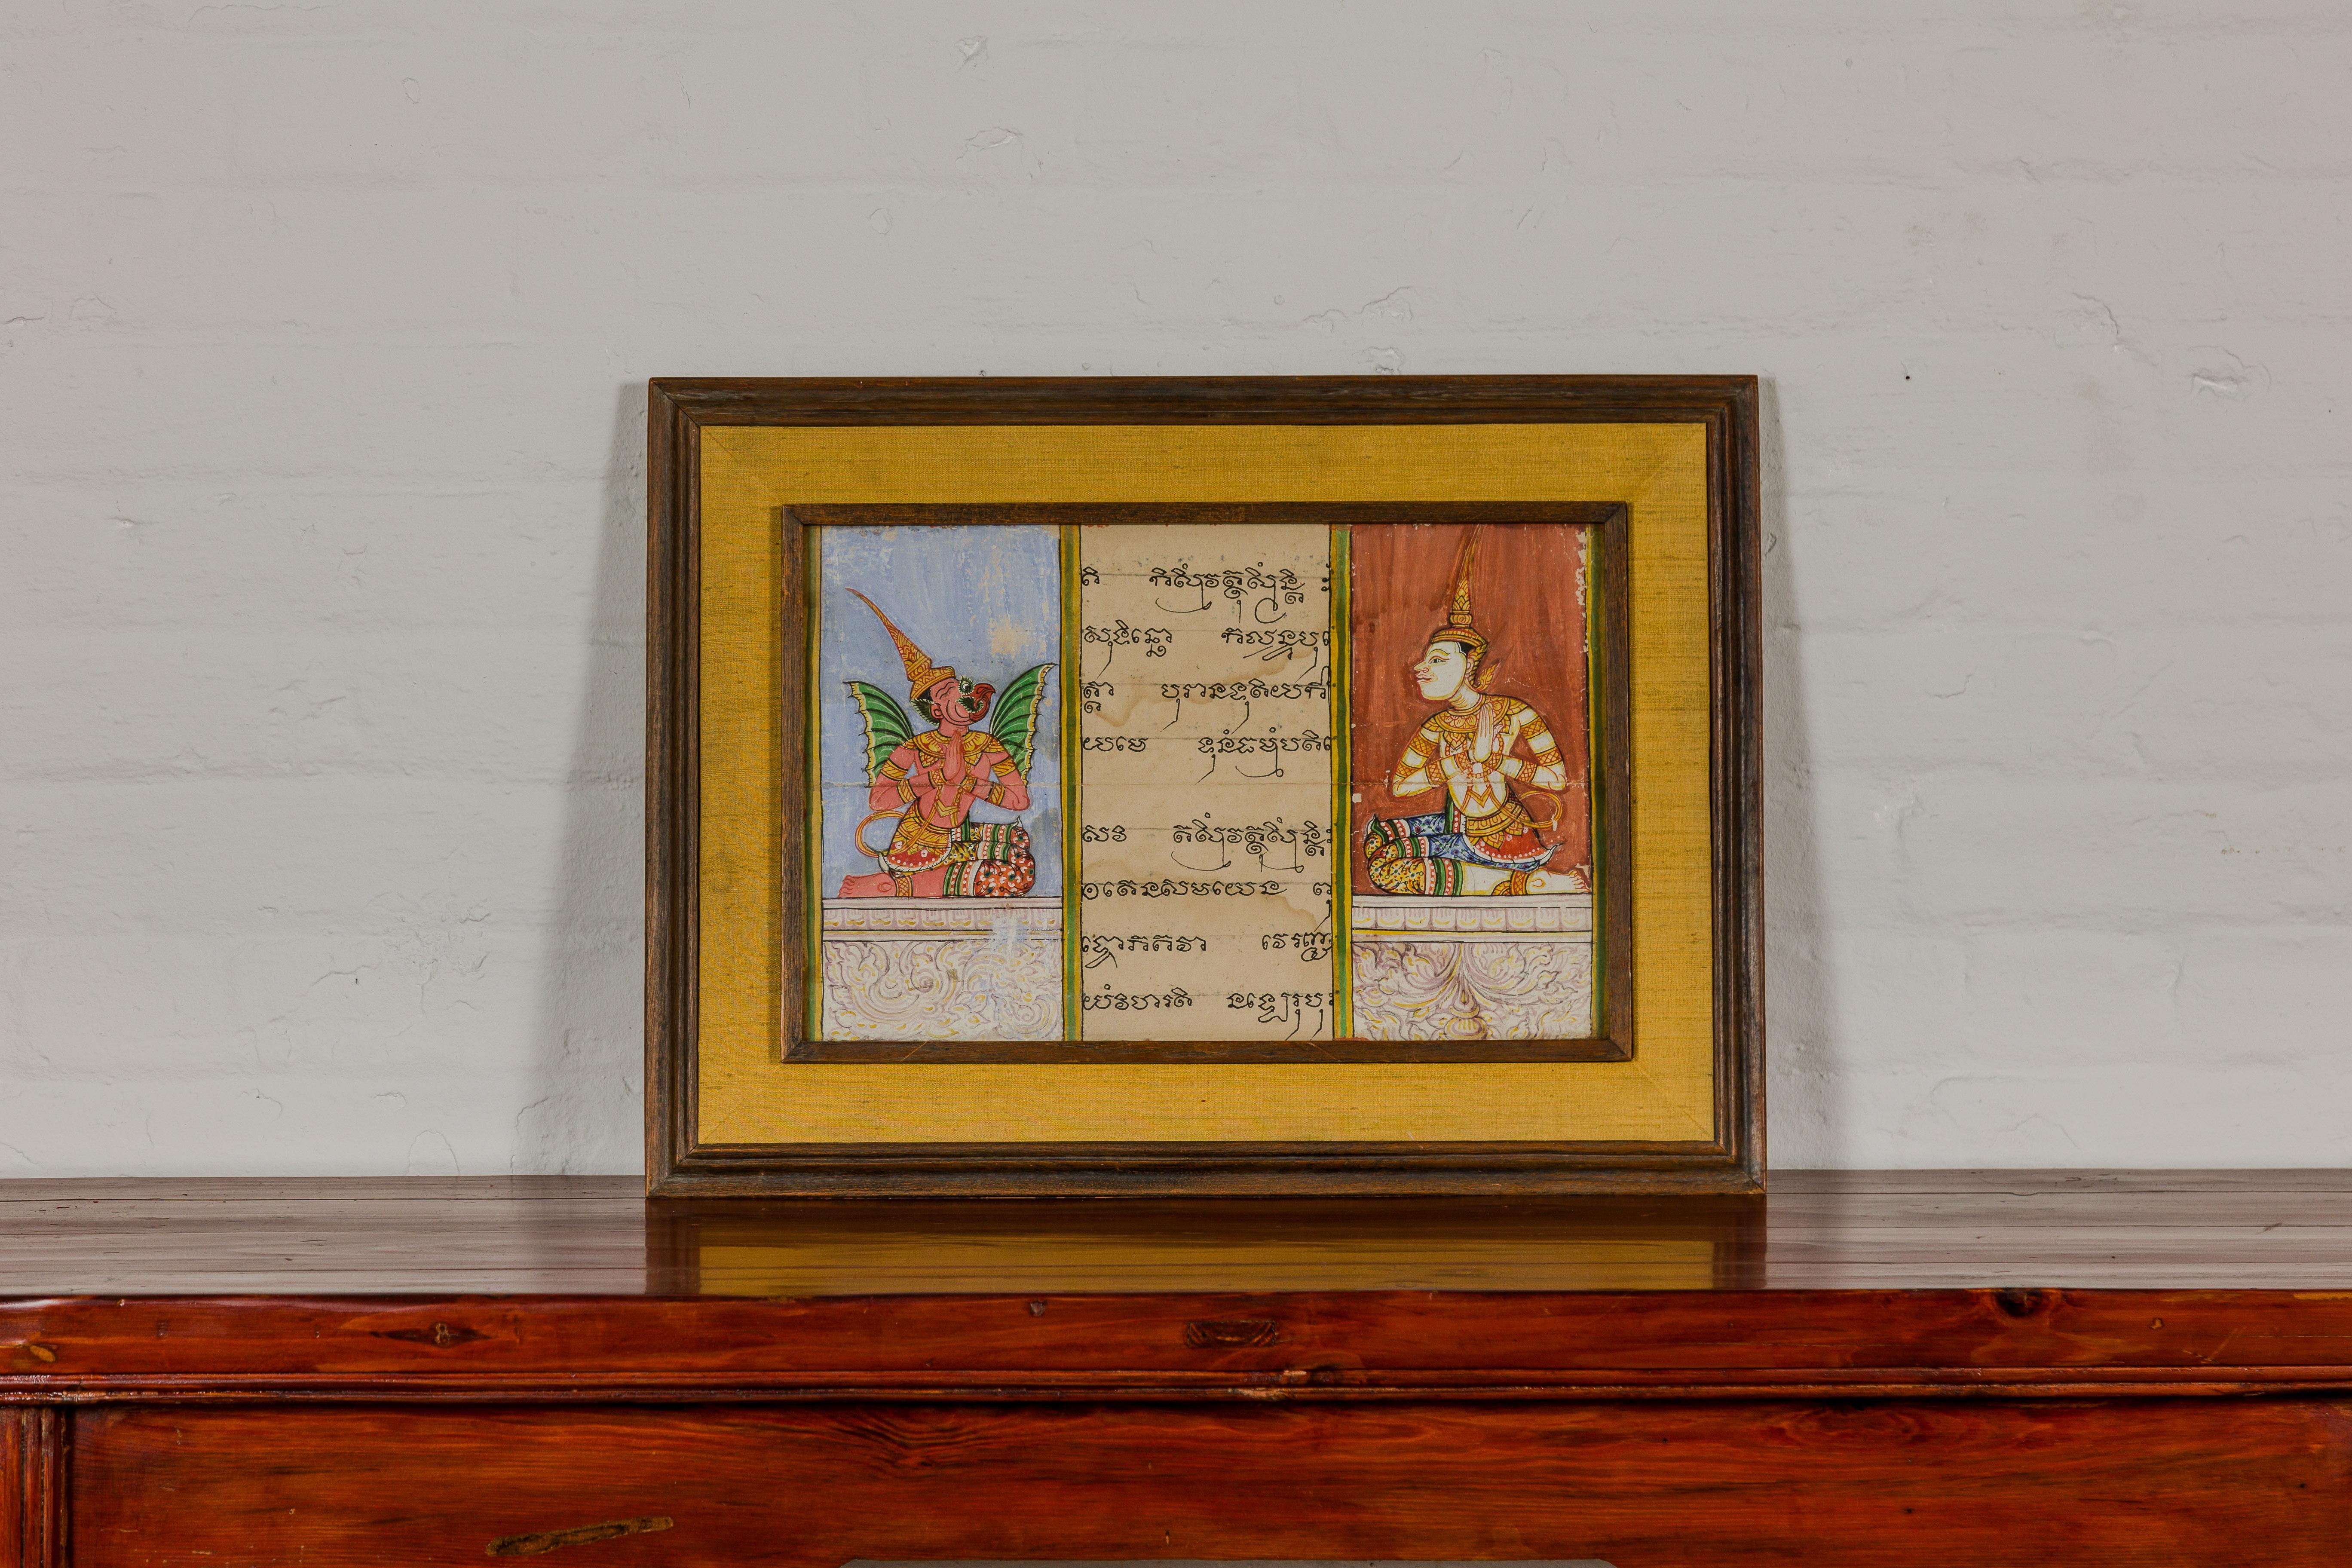 A vintage illuminated page manuscript taken from a Thai Buddhist prayer book and set inside custom wooden frame under glass. This vintage illuminated manuscript page, delicately extracted from a Thai Buddhist prayer book, is a captivating piece of